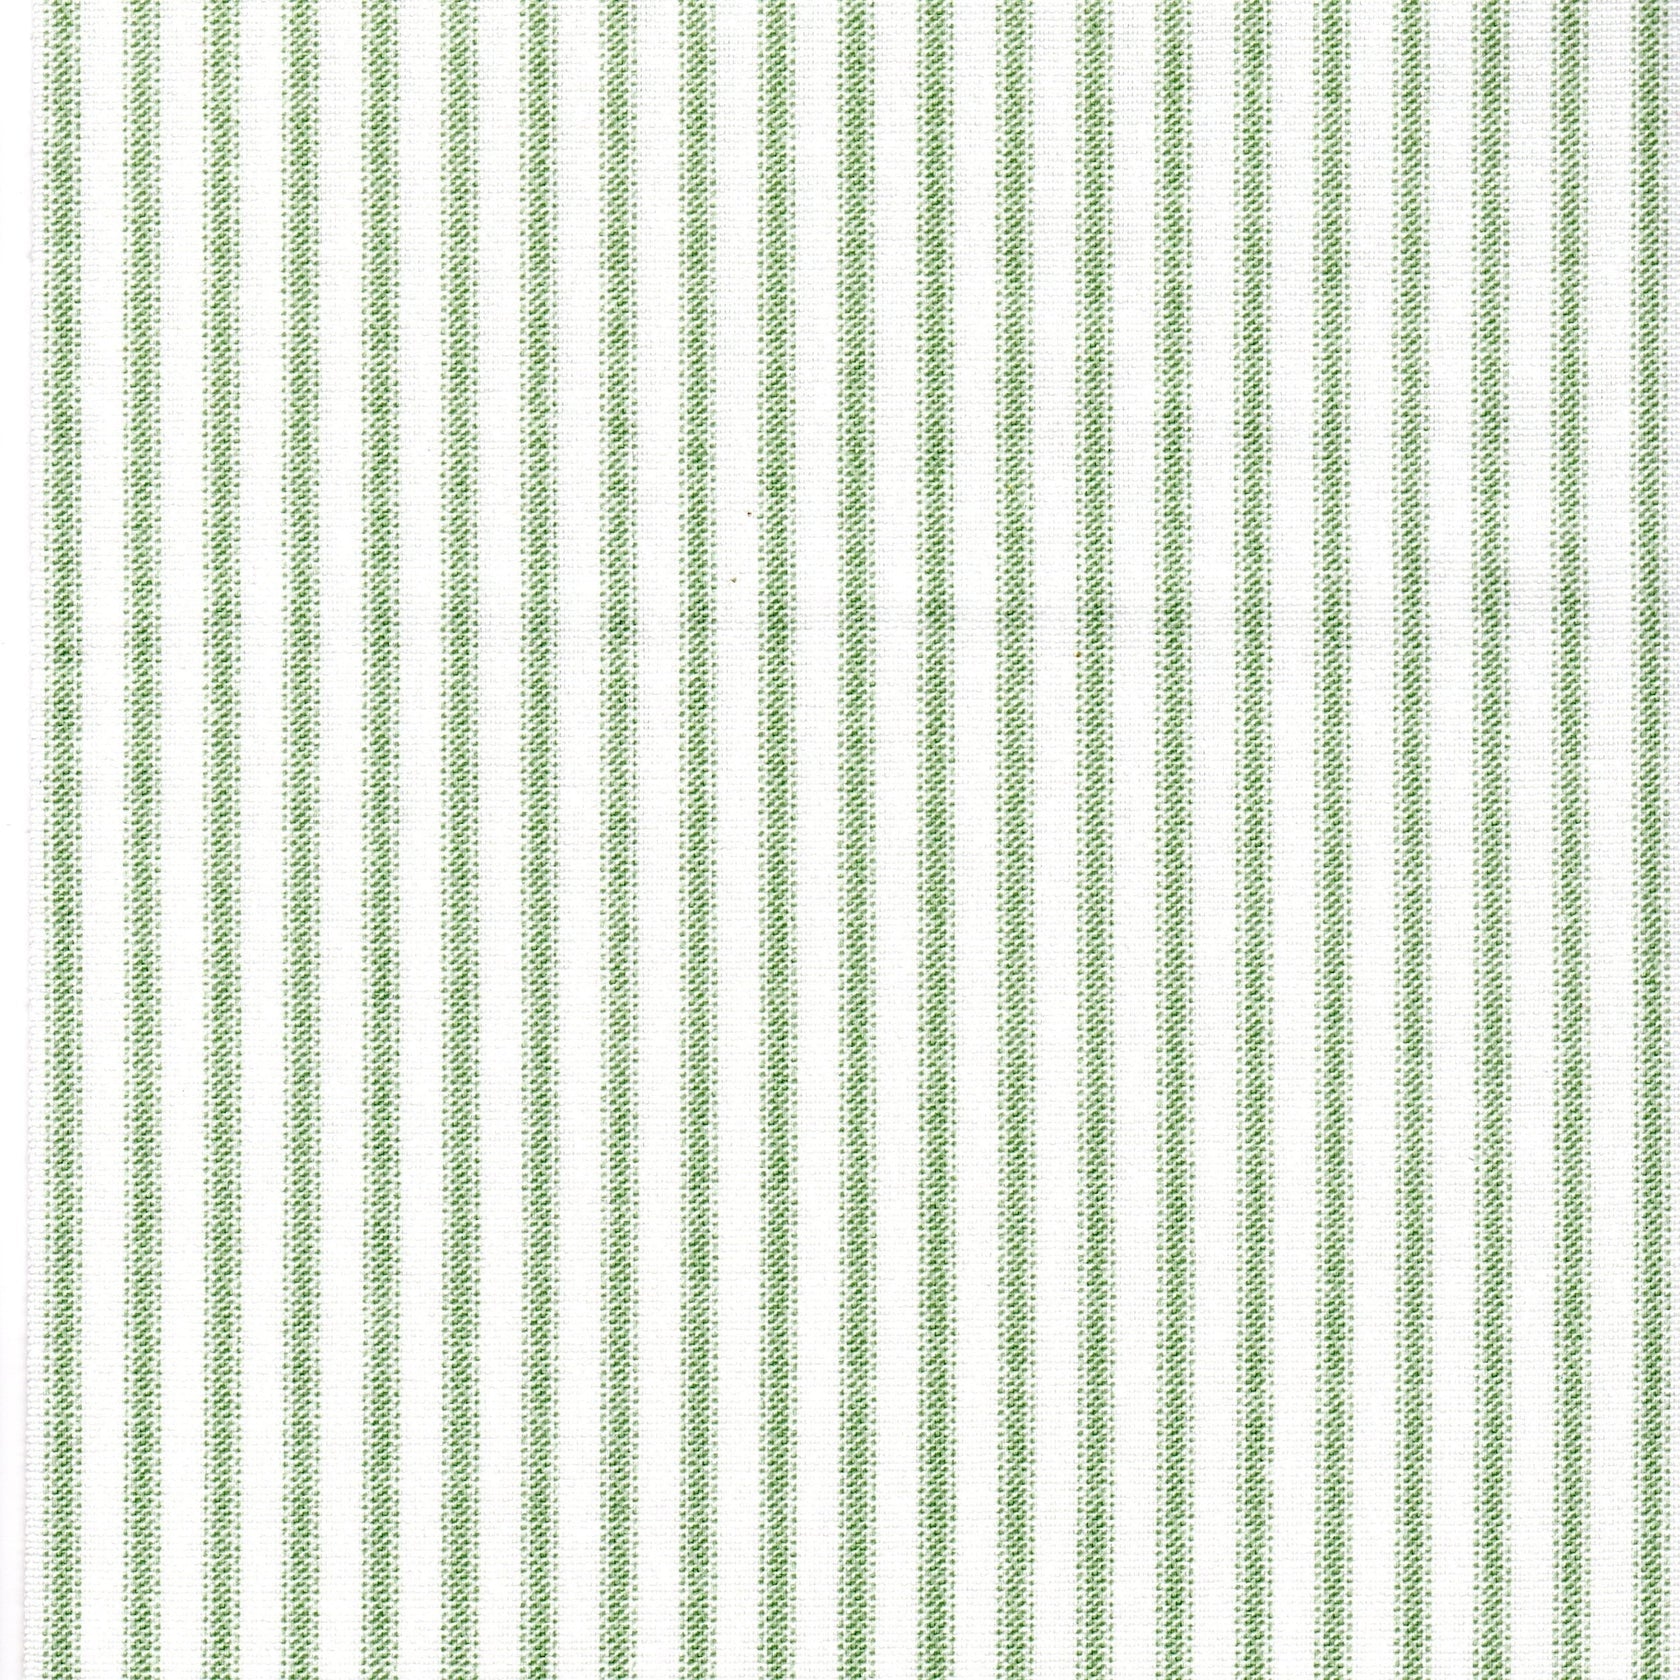 rod pocket curtains in Classic Sage Green Ticking Stripe on White